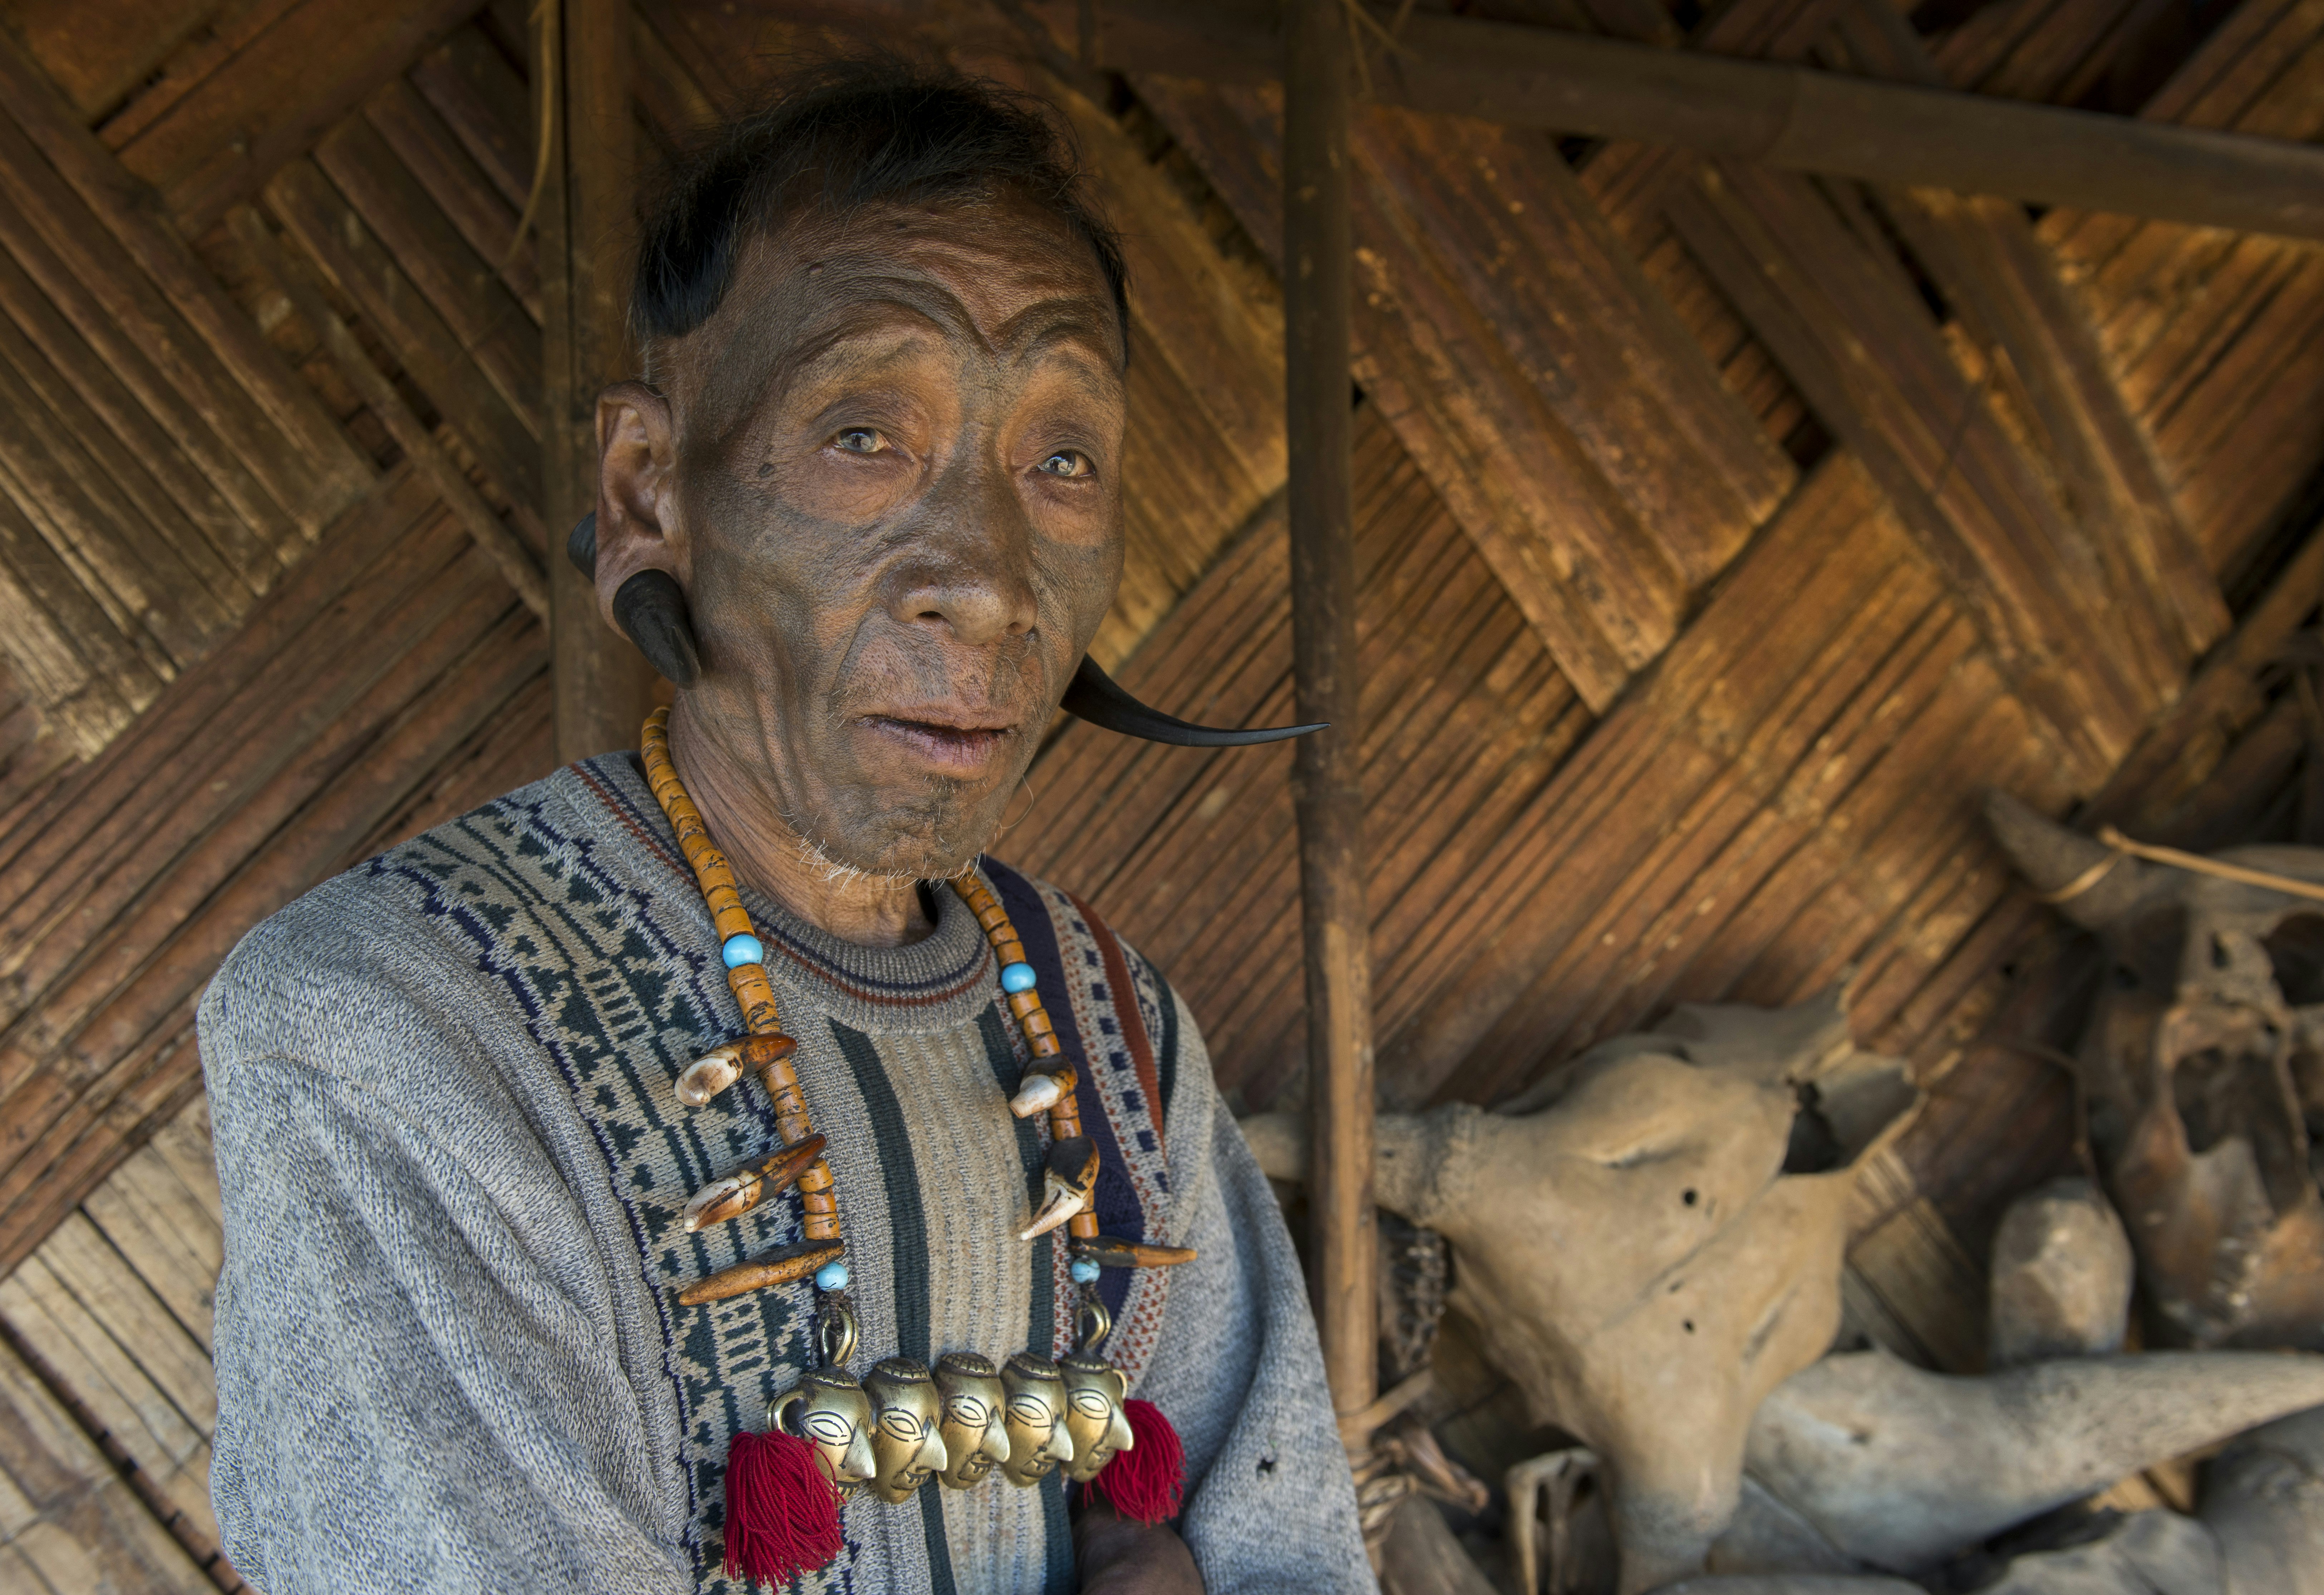 Profile shot of a former headhunter from the Konyak tribe in Nagaland. The man's face is darkened by tattoo ink and he has two large black tusks piercing either ear.